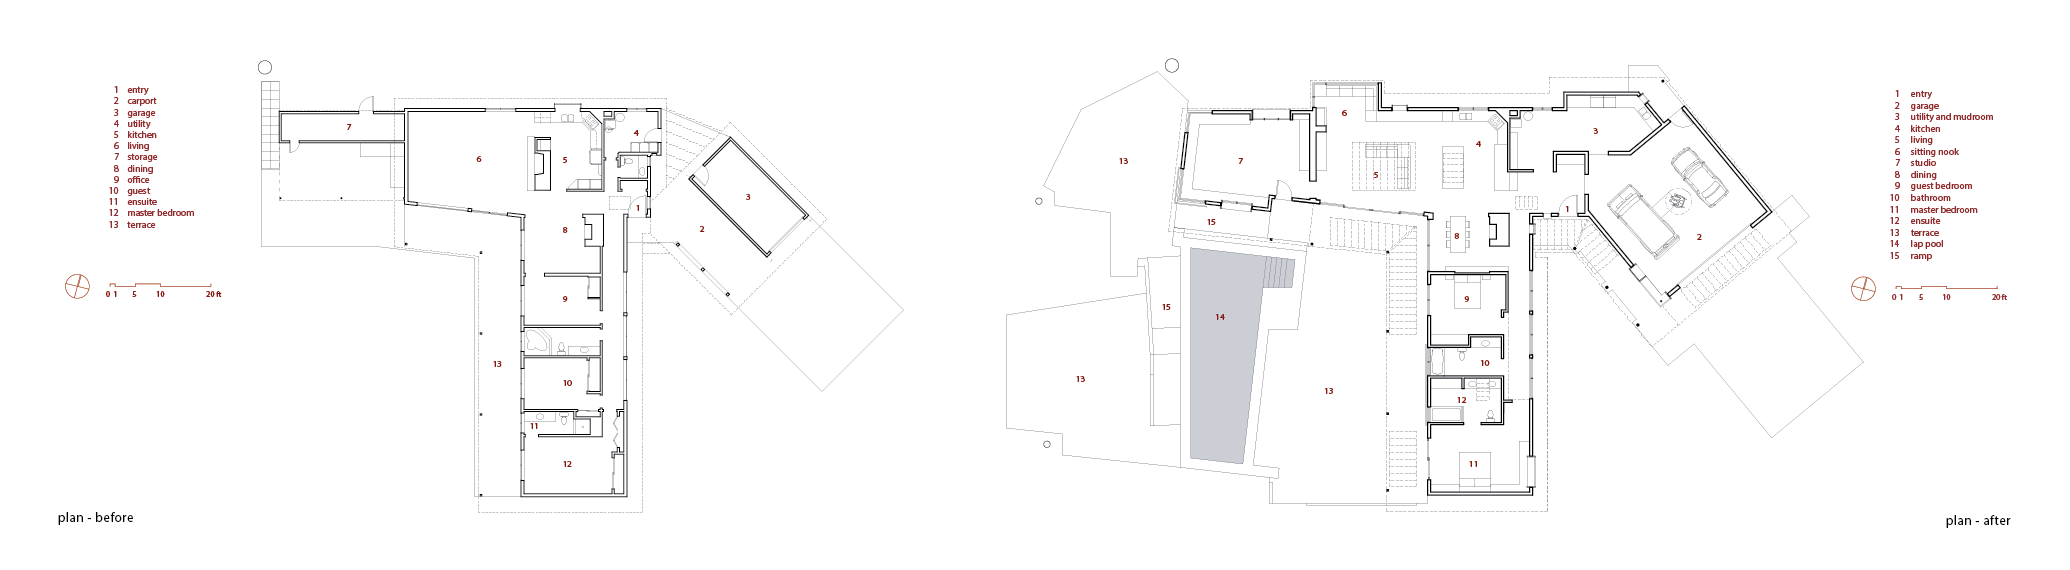 Floor plans with before on left and after on right. After shows additions on left and right as well as significant outdoor changes.